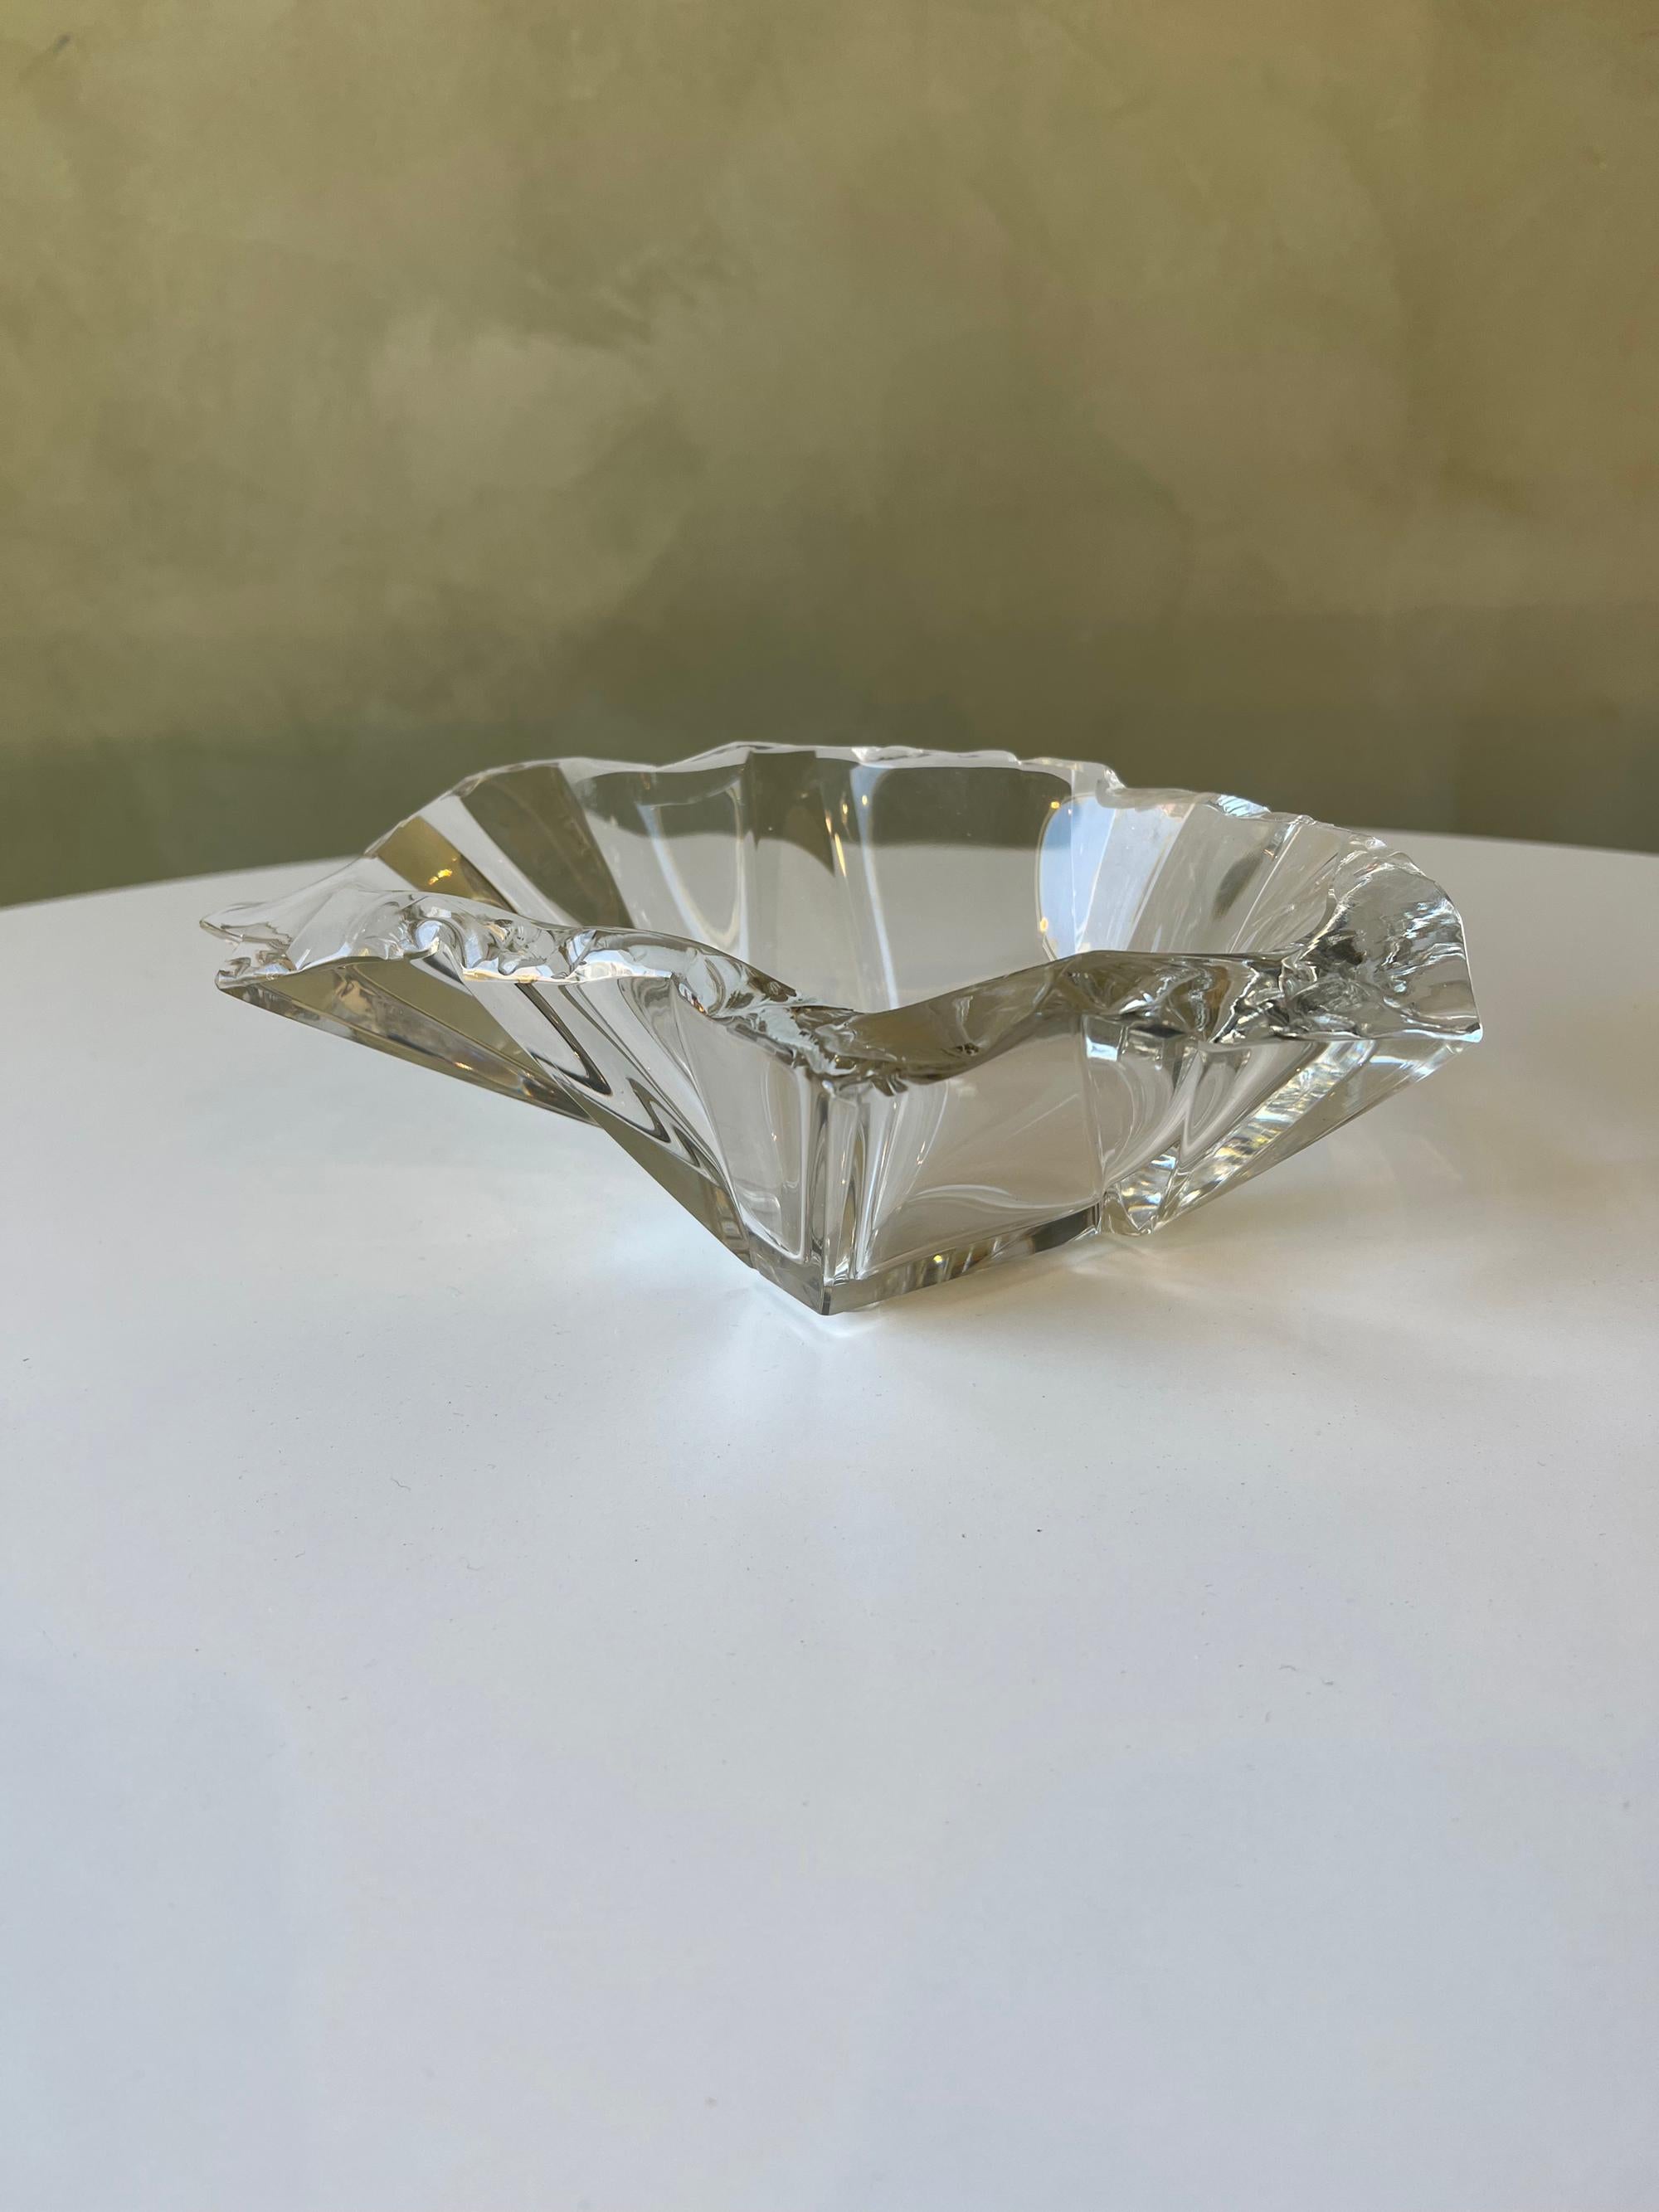 Mould blown crystal dish by Tapio Wirkkala with hand-chiseled rim. First year production with a signature and model number inscribed on the base. Very few light scratches on the base and otherwise in excellent vintage condition. A really difficult